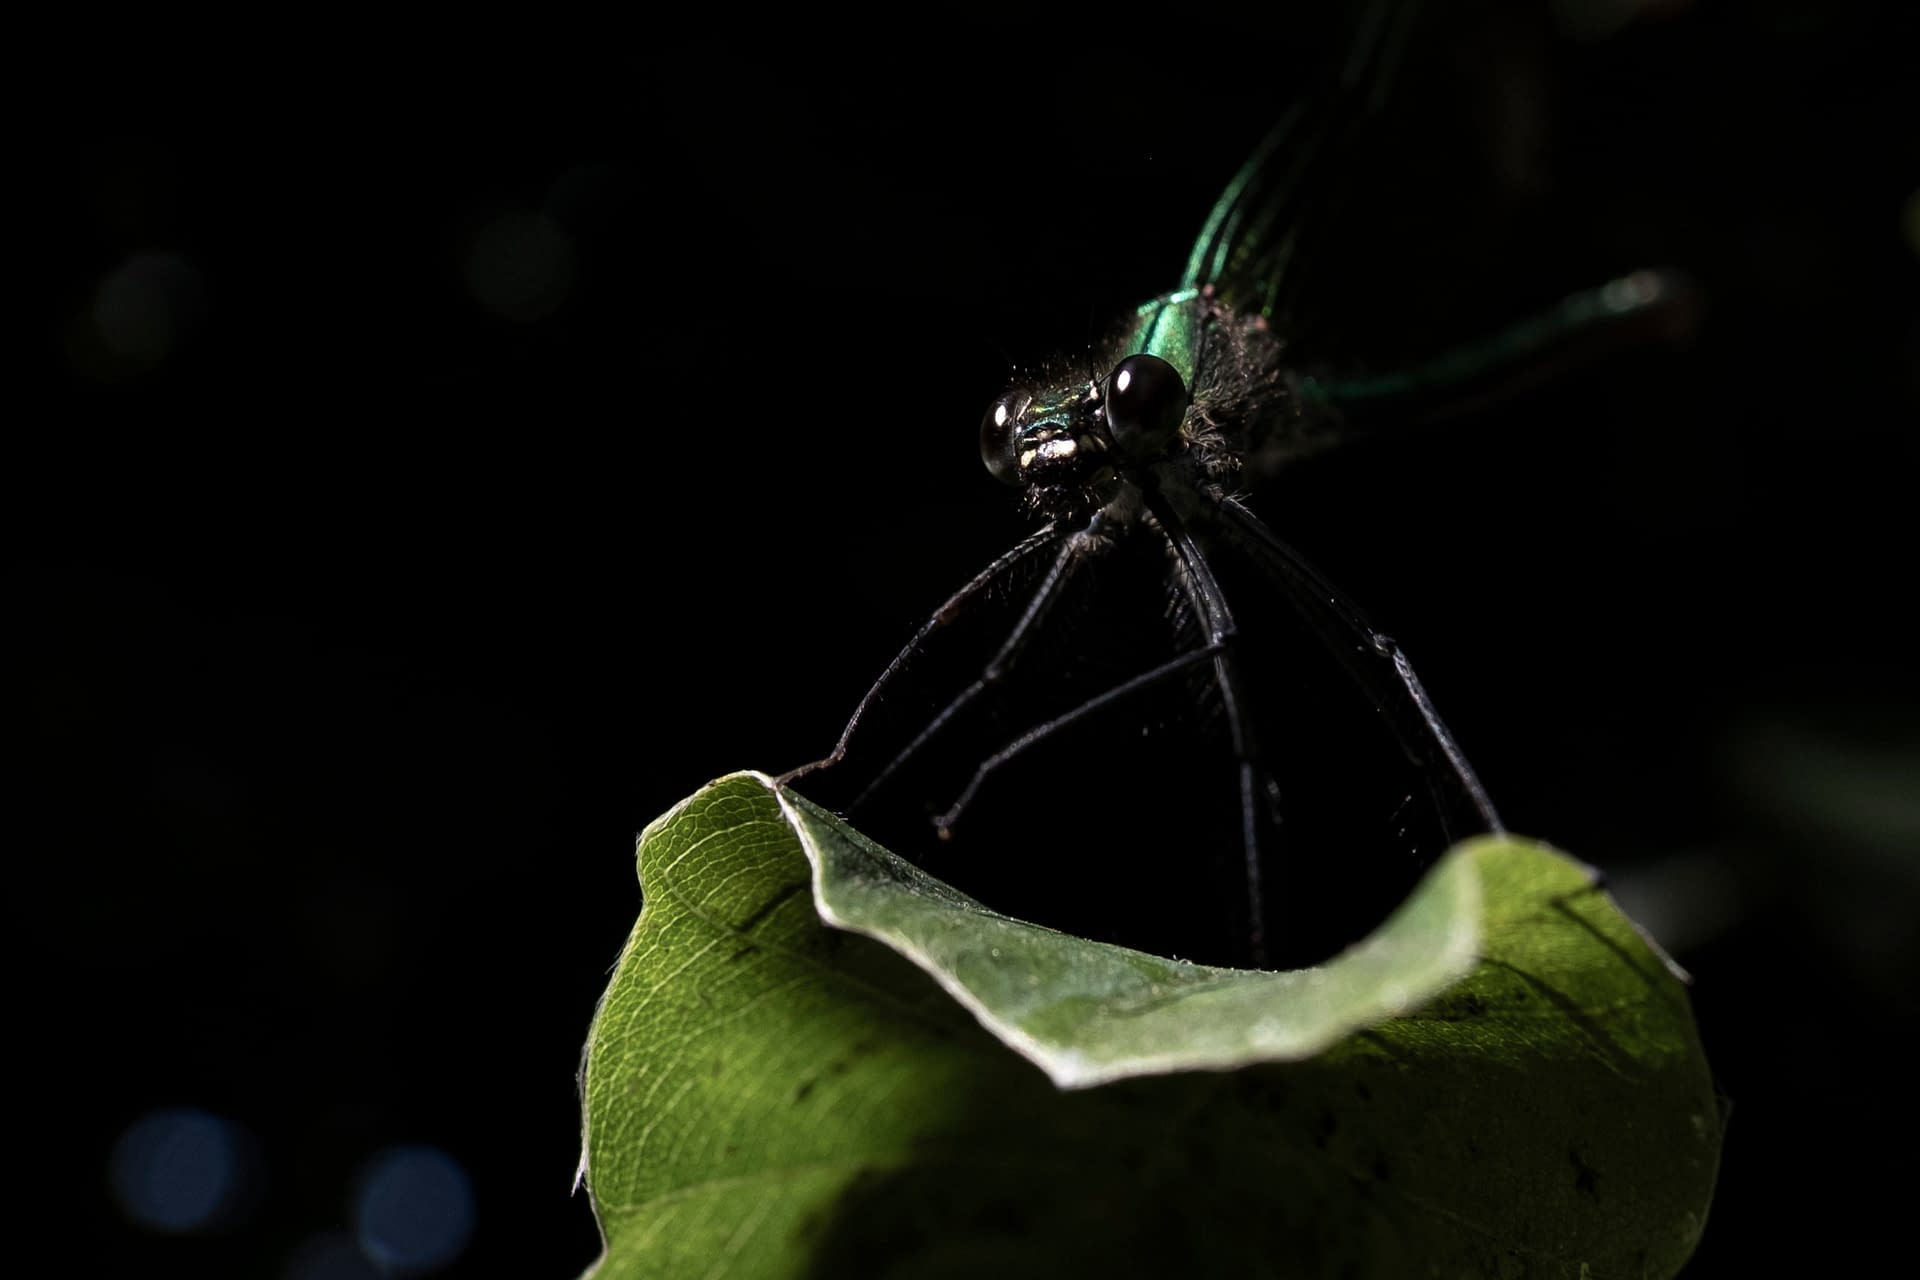 The green dragonfly